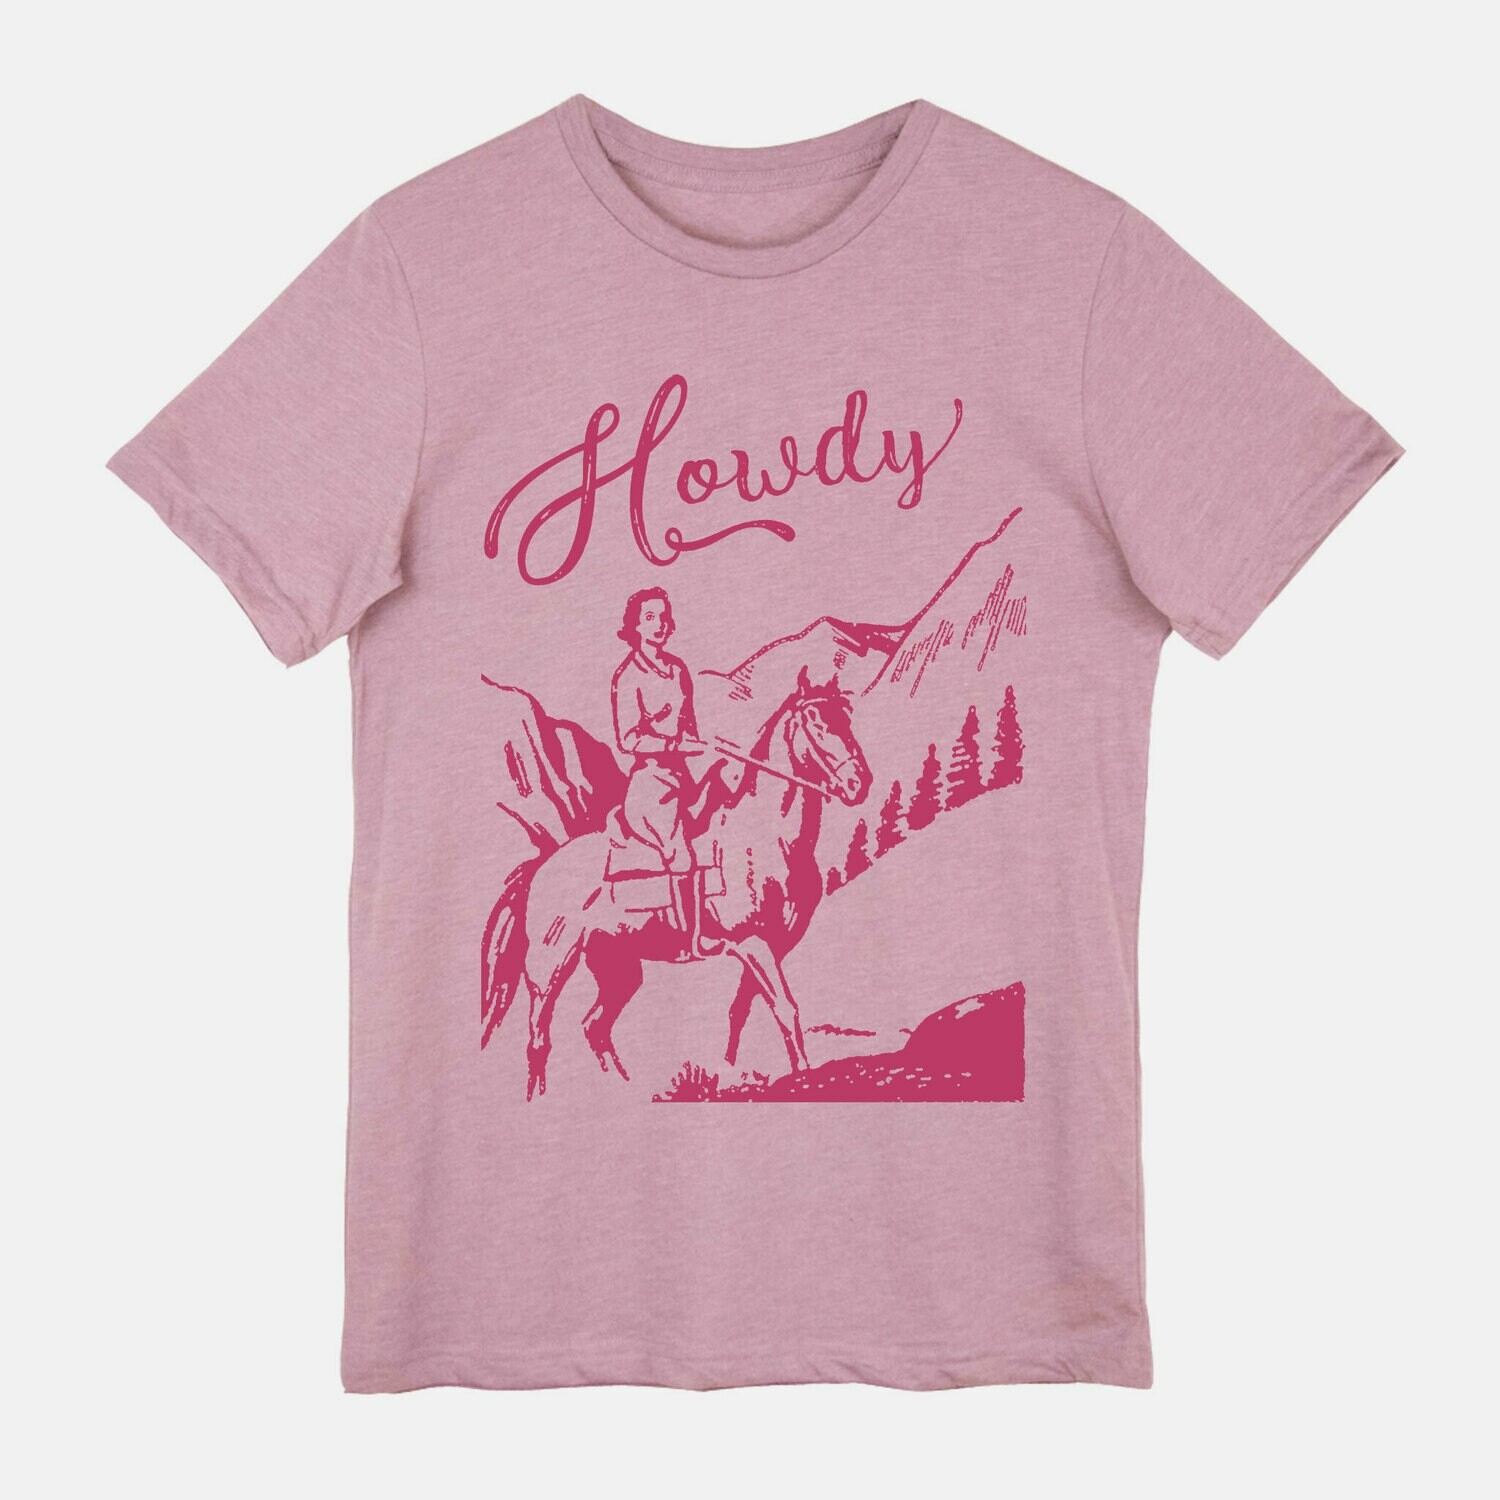 Howdy Cowgirl Rodeo Equestrian Horse T-shirt Tee